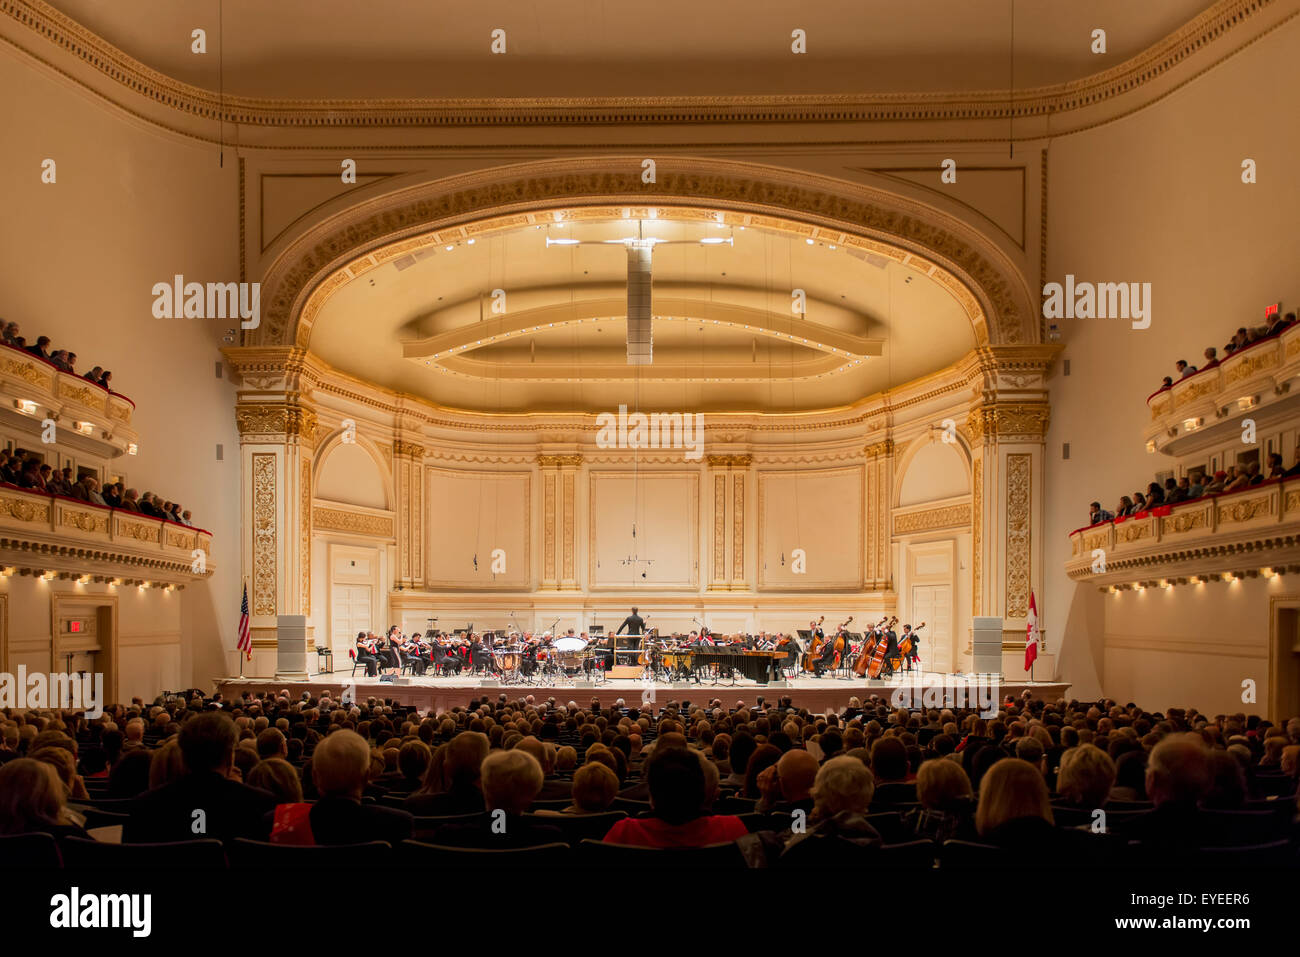 Crowd Enjoying Orchestra Performance In Carnegie Hall New